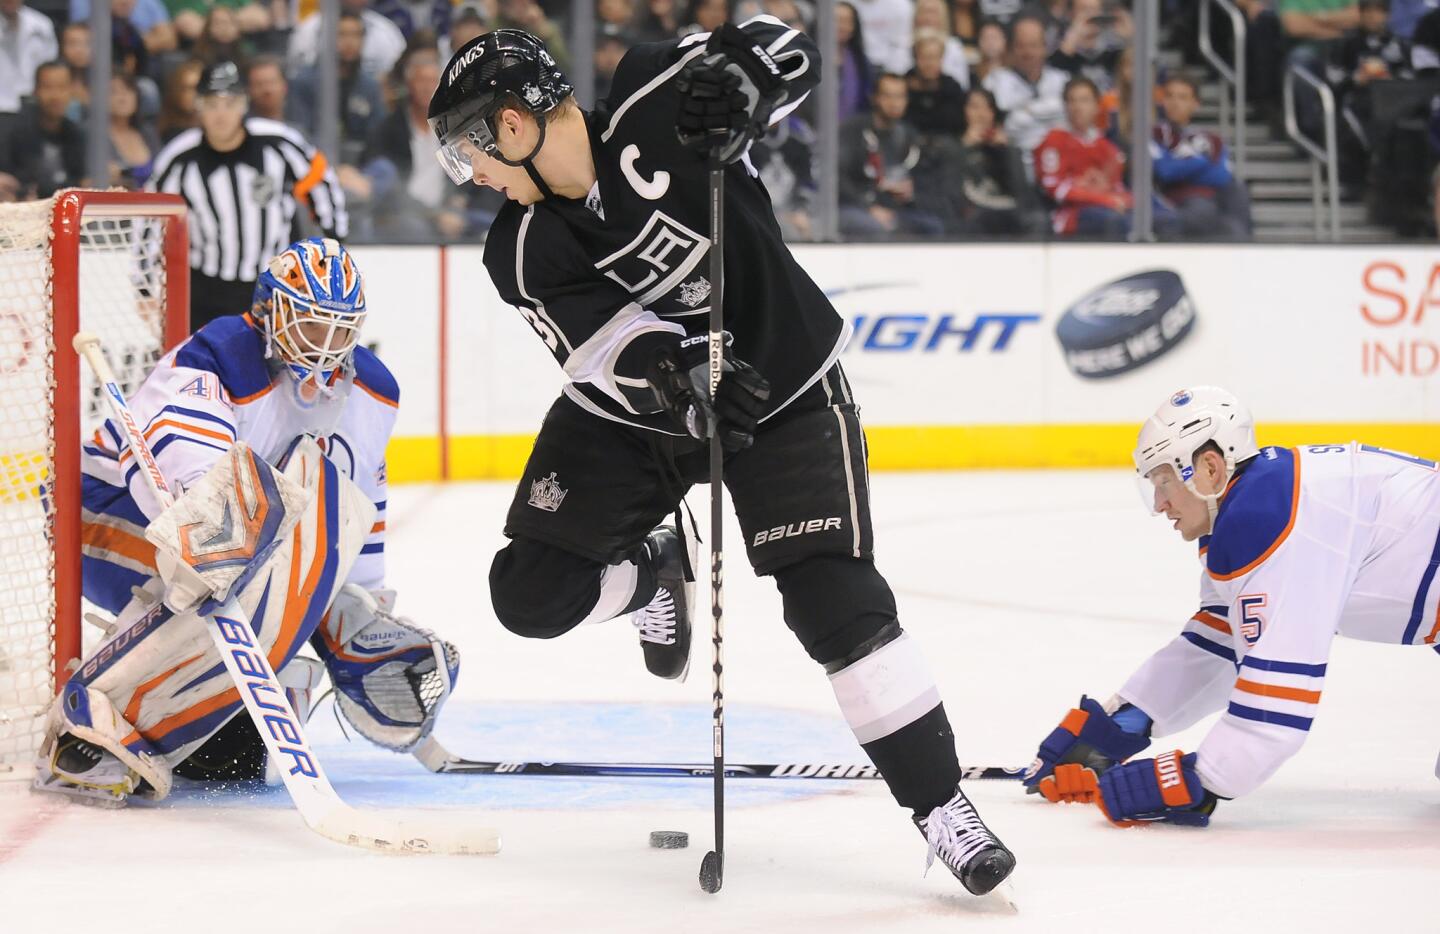 Kings' Dustin Brown takes a shot on Oilers goalie Devan Dubnyk as Ladislav Smid helps on defense in the first period.